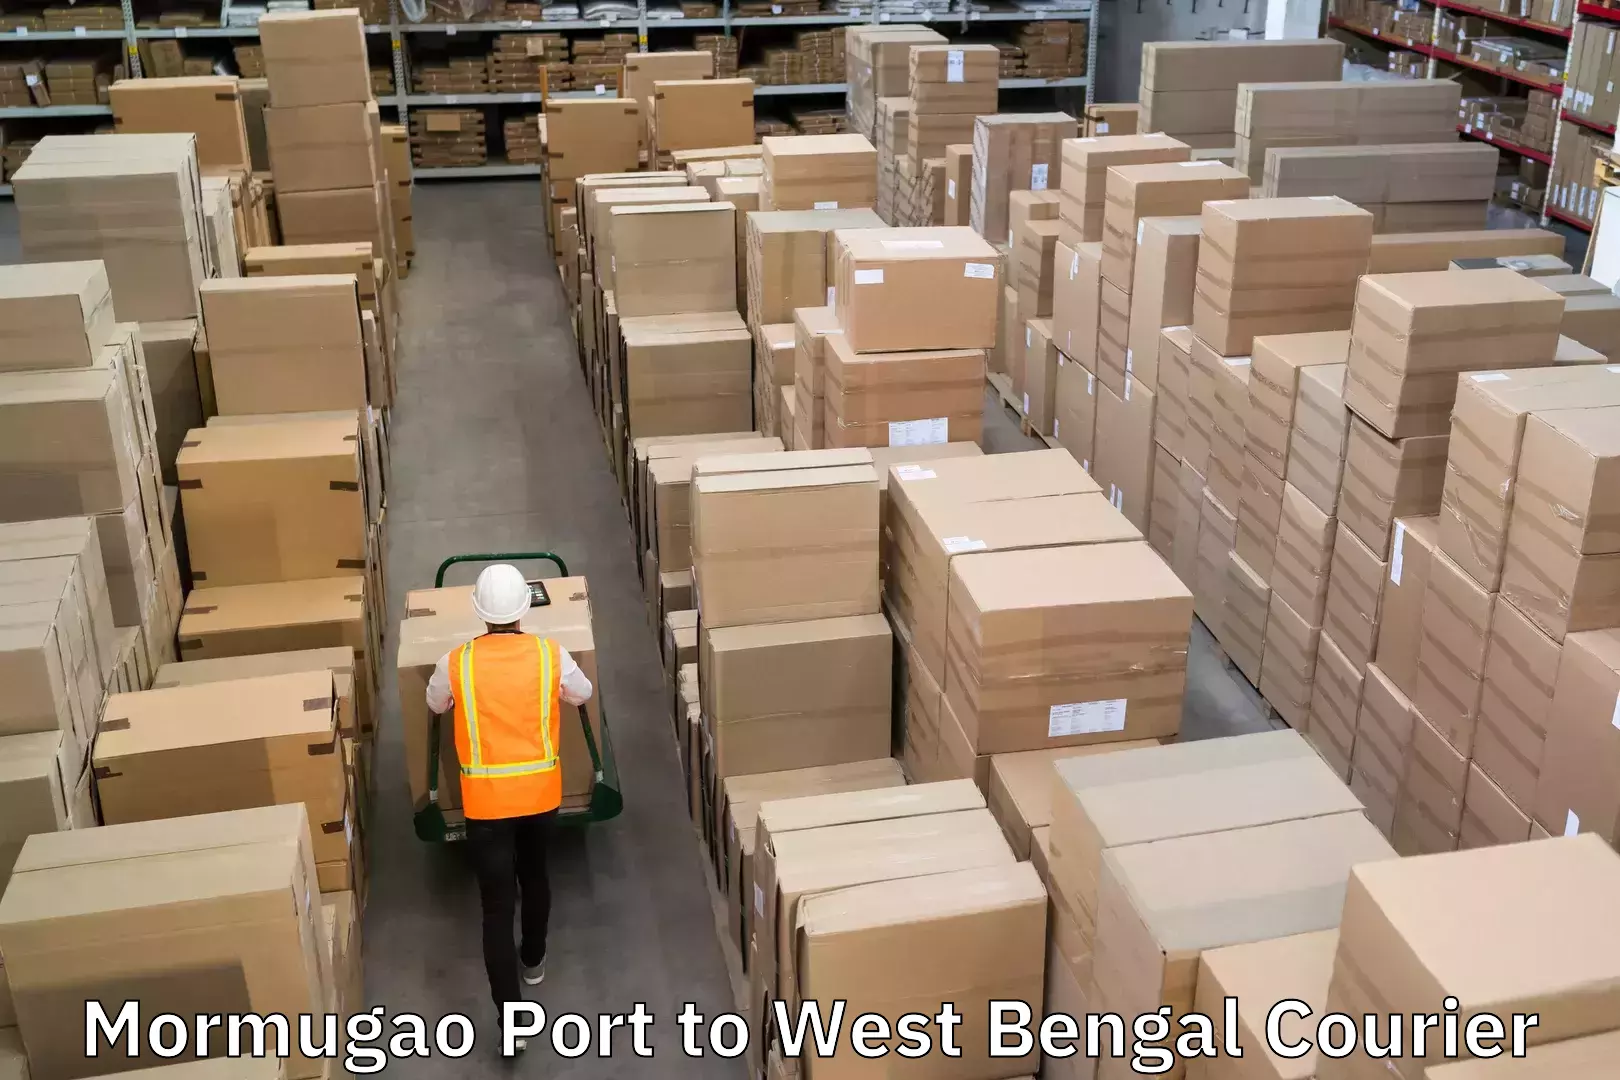 Overnight delivery services Mormugao Port to Tollygunge